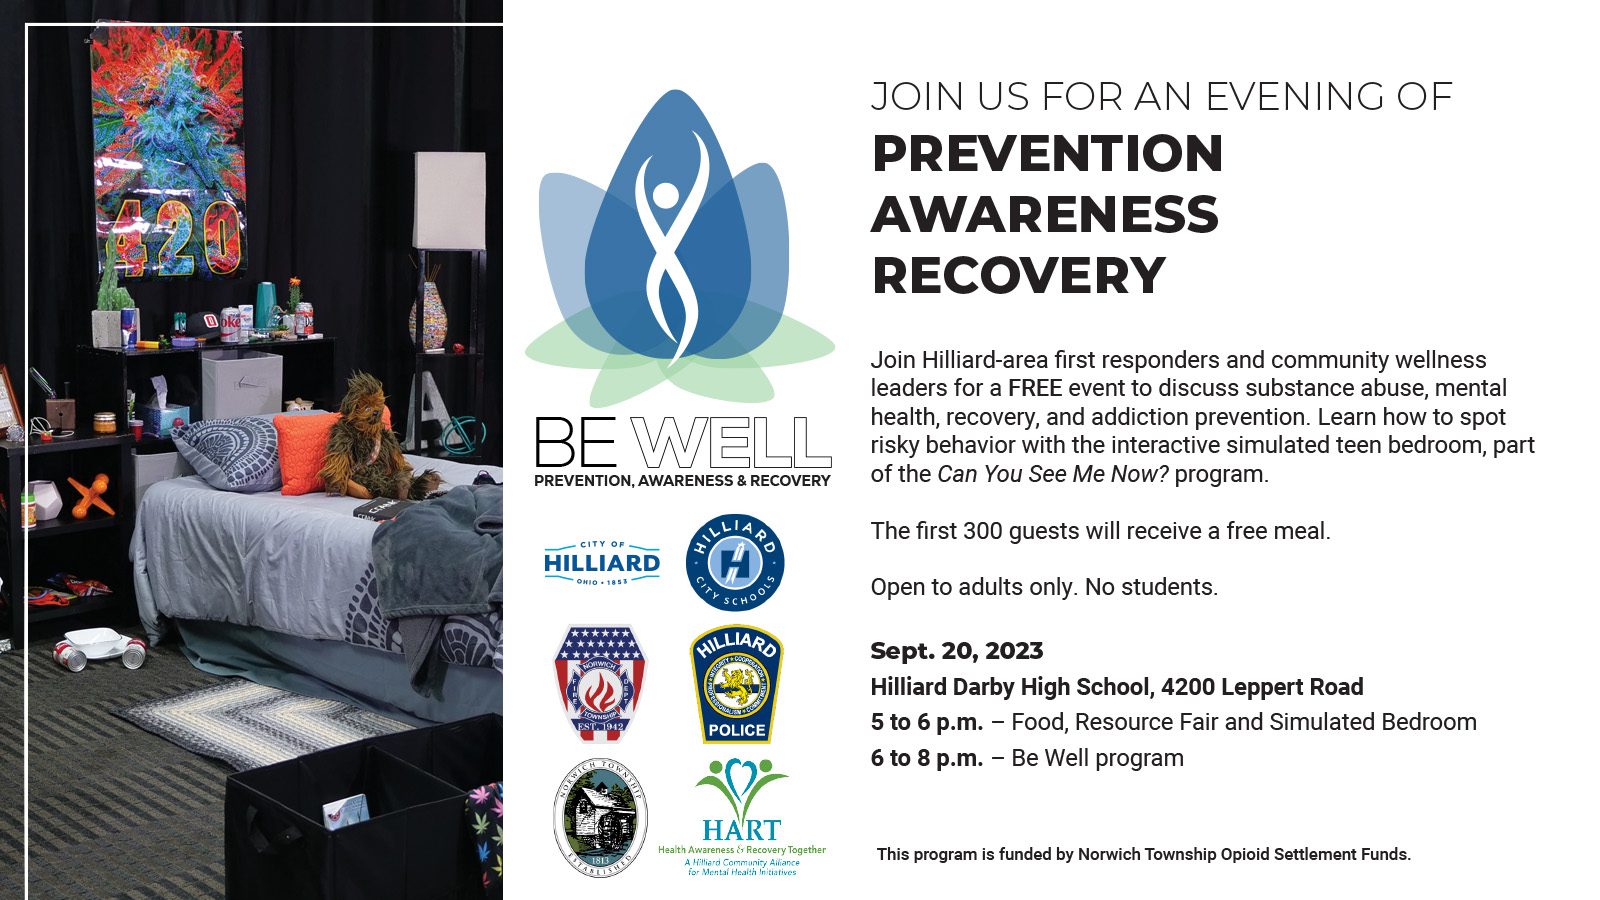 Be Well: Prevention, Awareness, & Recovery Sept. 20th